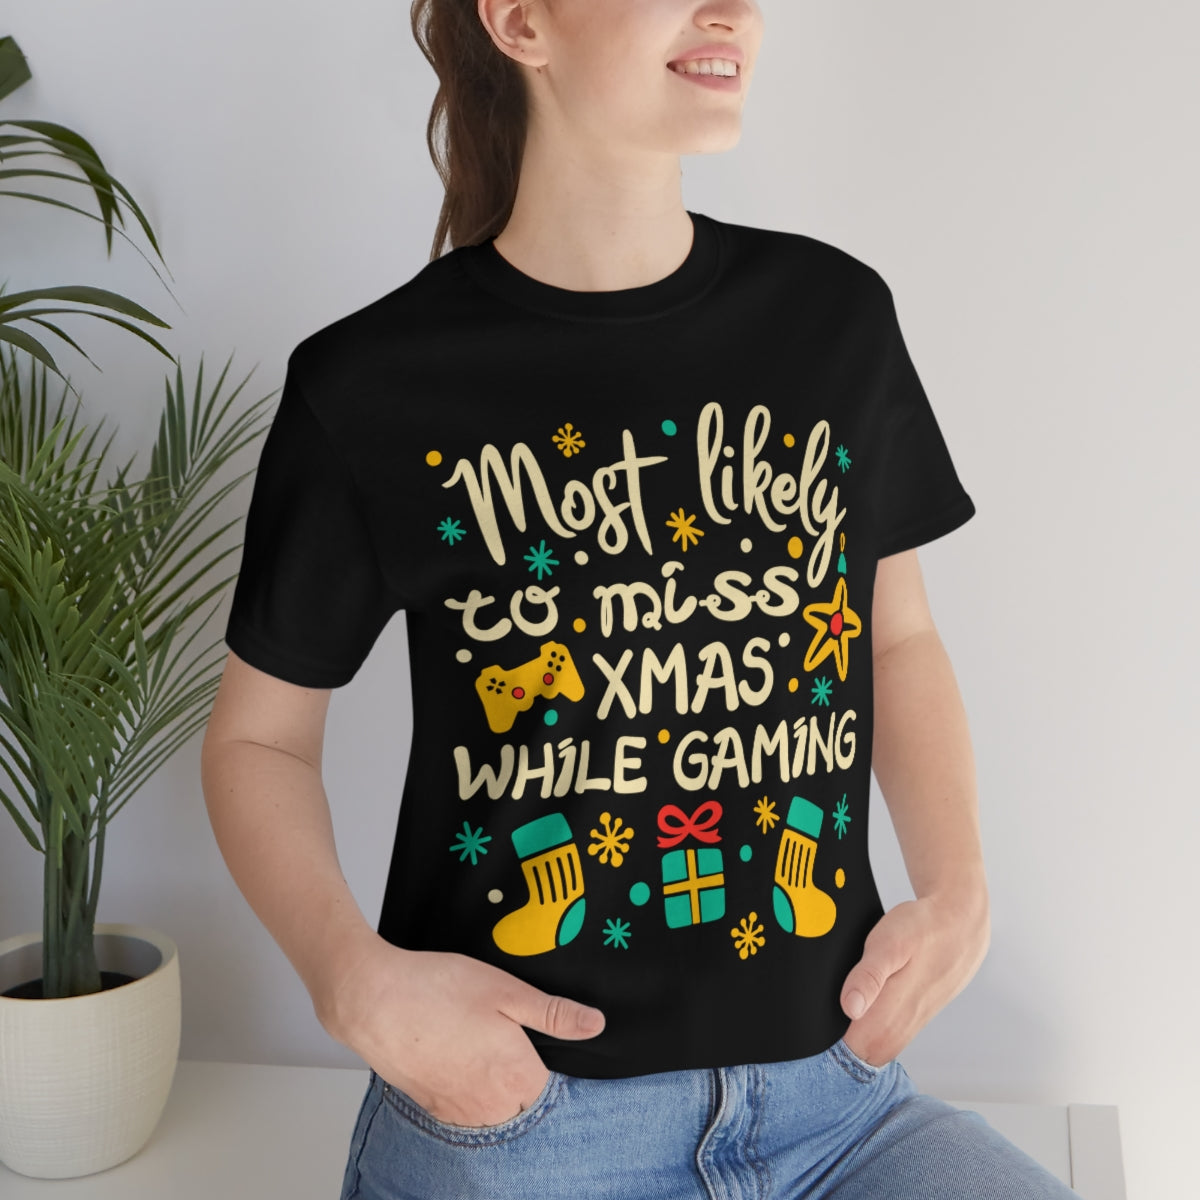 Most Likely to miss XMAS while gaming T-shirt for women or men, Most Likely To Christmas Shirts, Custom Most Likely T-Shirts - 37 Design Unit